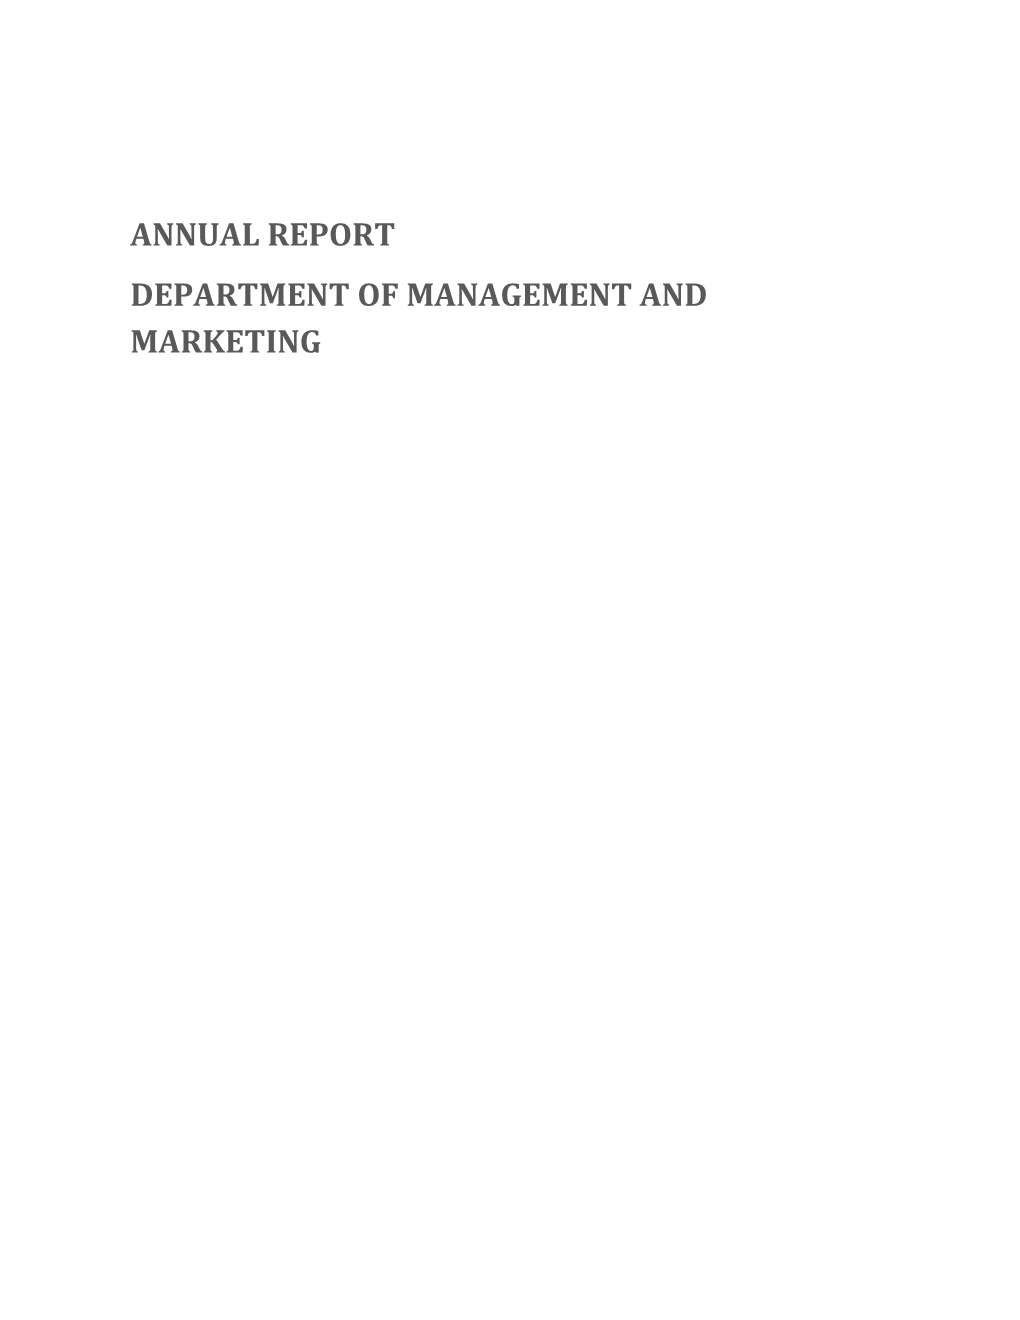 Annual Report Department of Management and Marketing Program Accomplishments